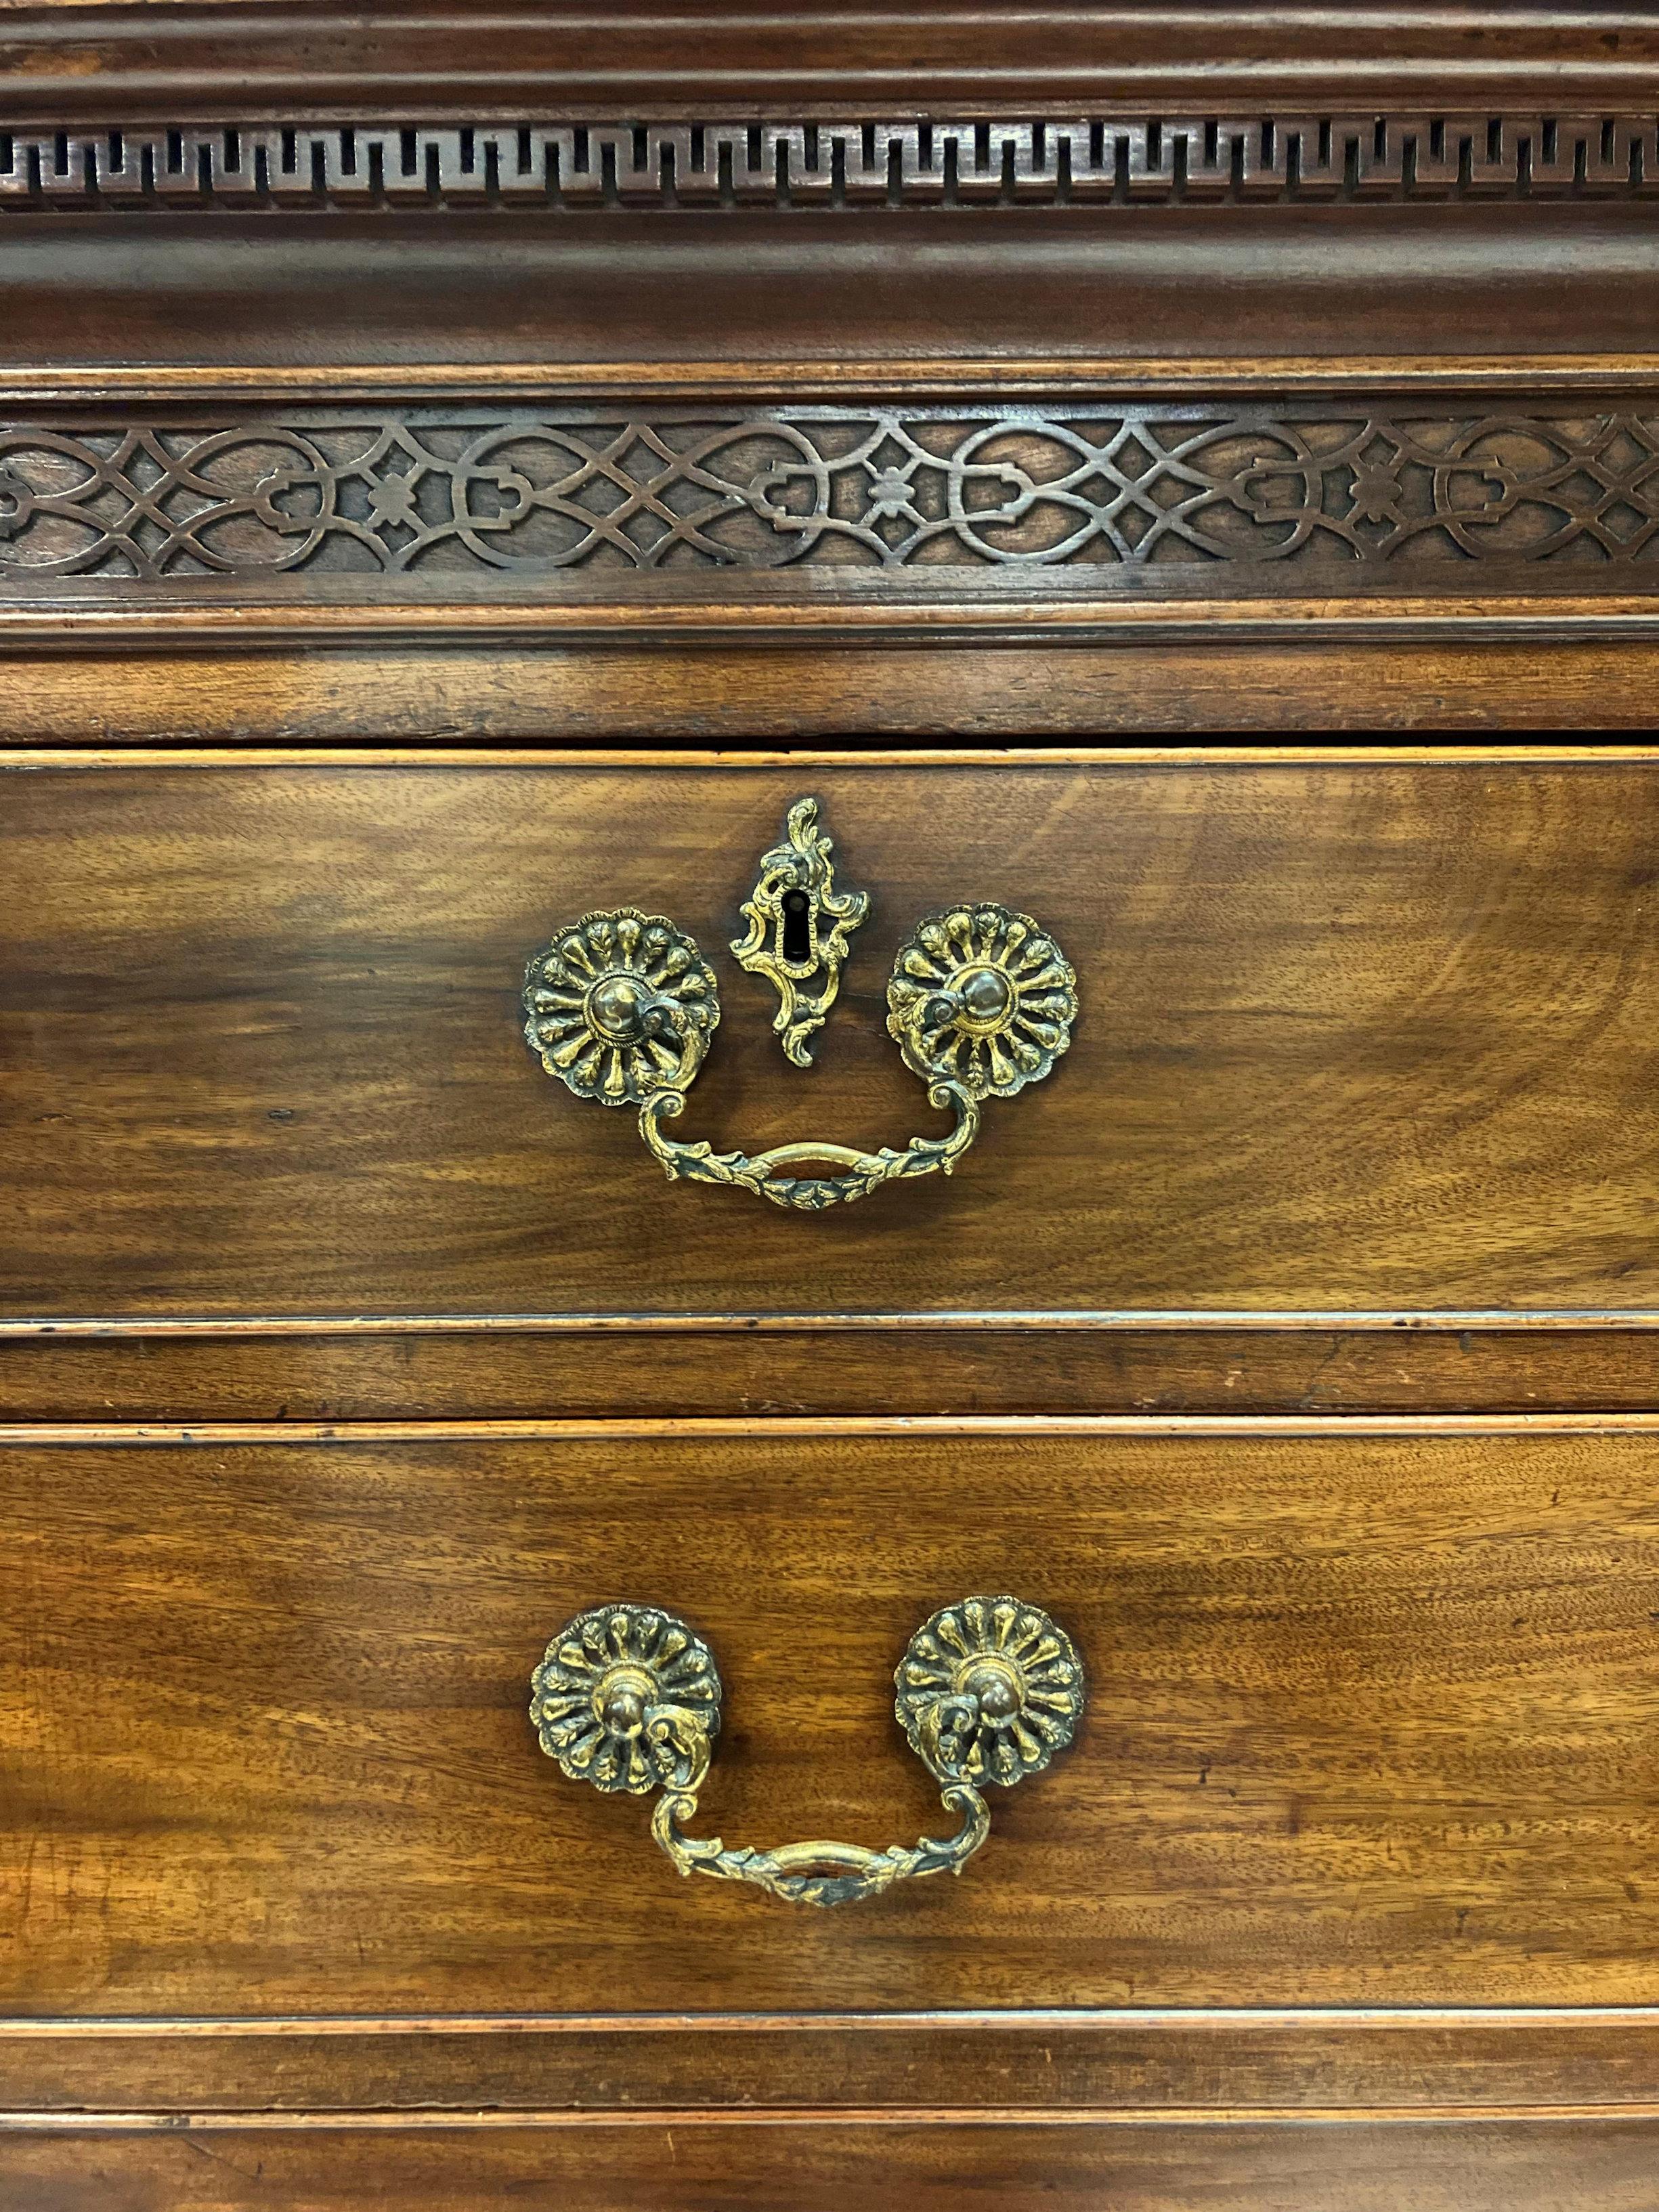 A finely proportioned English George III Chippendale period chest of drawers in mahogany. With a Greek key and fretwork upper frieze, each drawer with the original ornate handles and escutcheons.